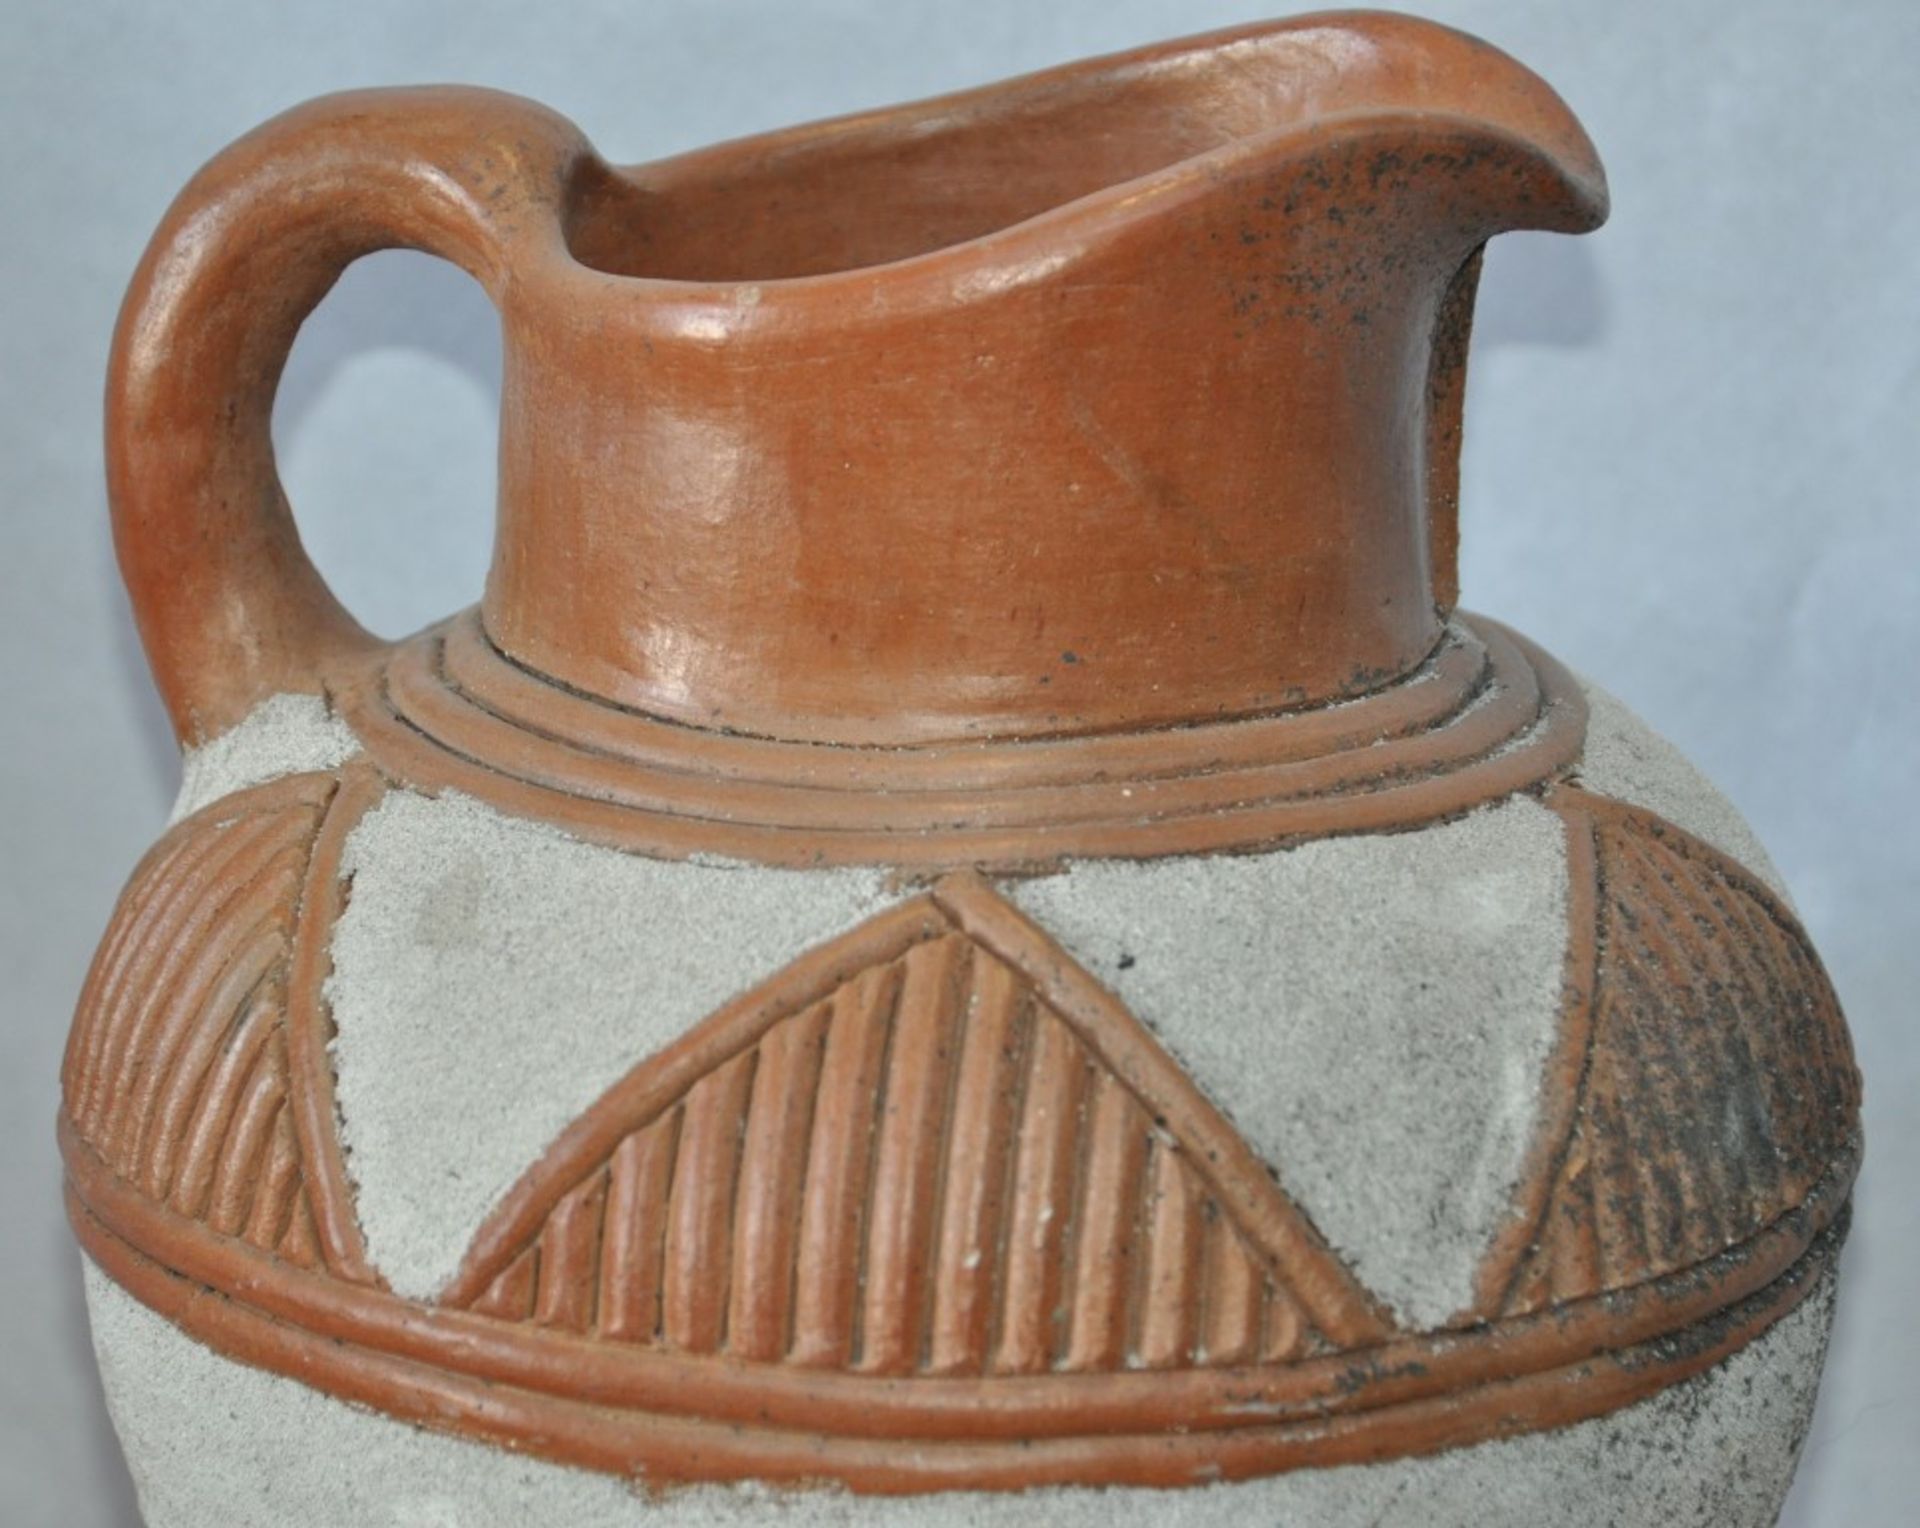 1 x Earthenware Ceramic Water Jug – Pre-owned, Great Condition With No Damage Or Major Wear - - Image 3 of 3